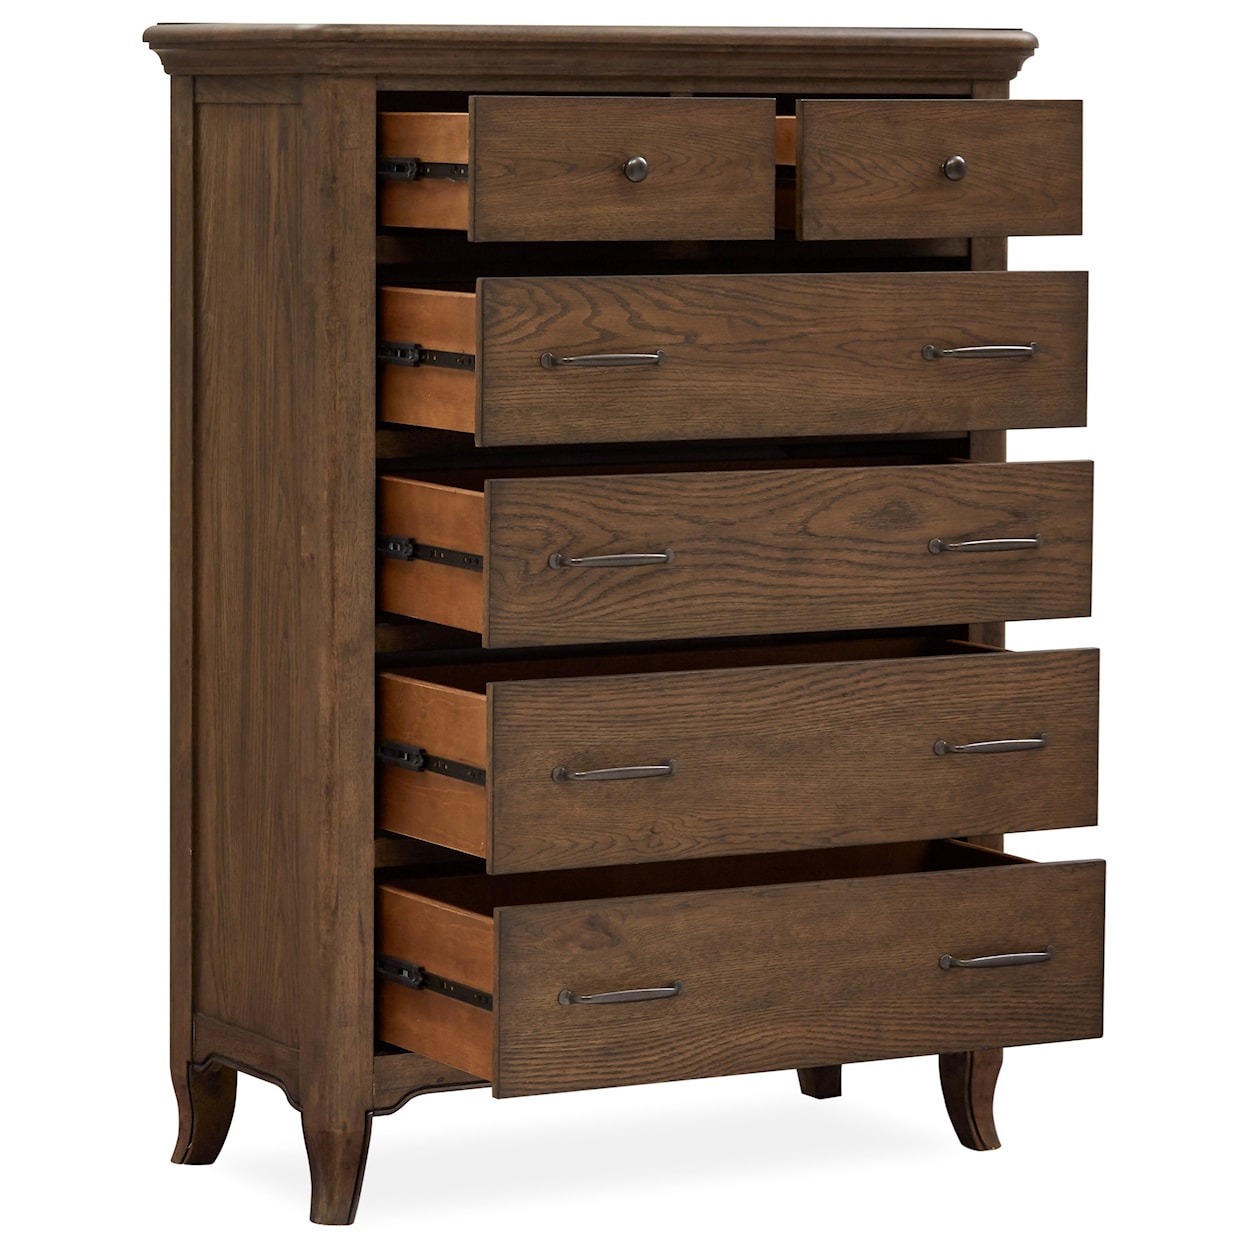 Belfort Select Withers Grove Chest of Drawers